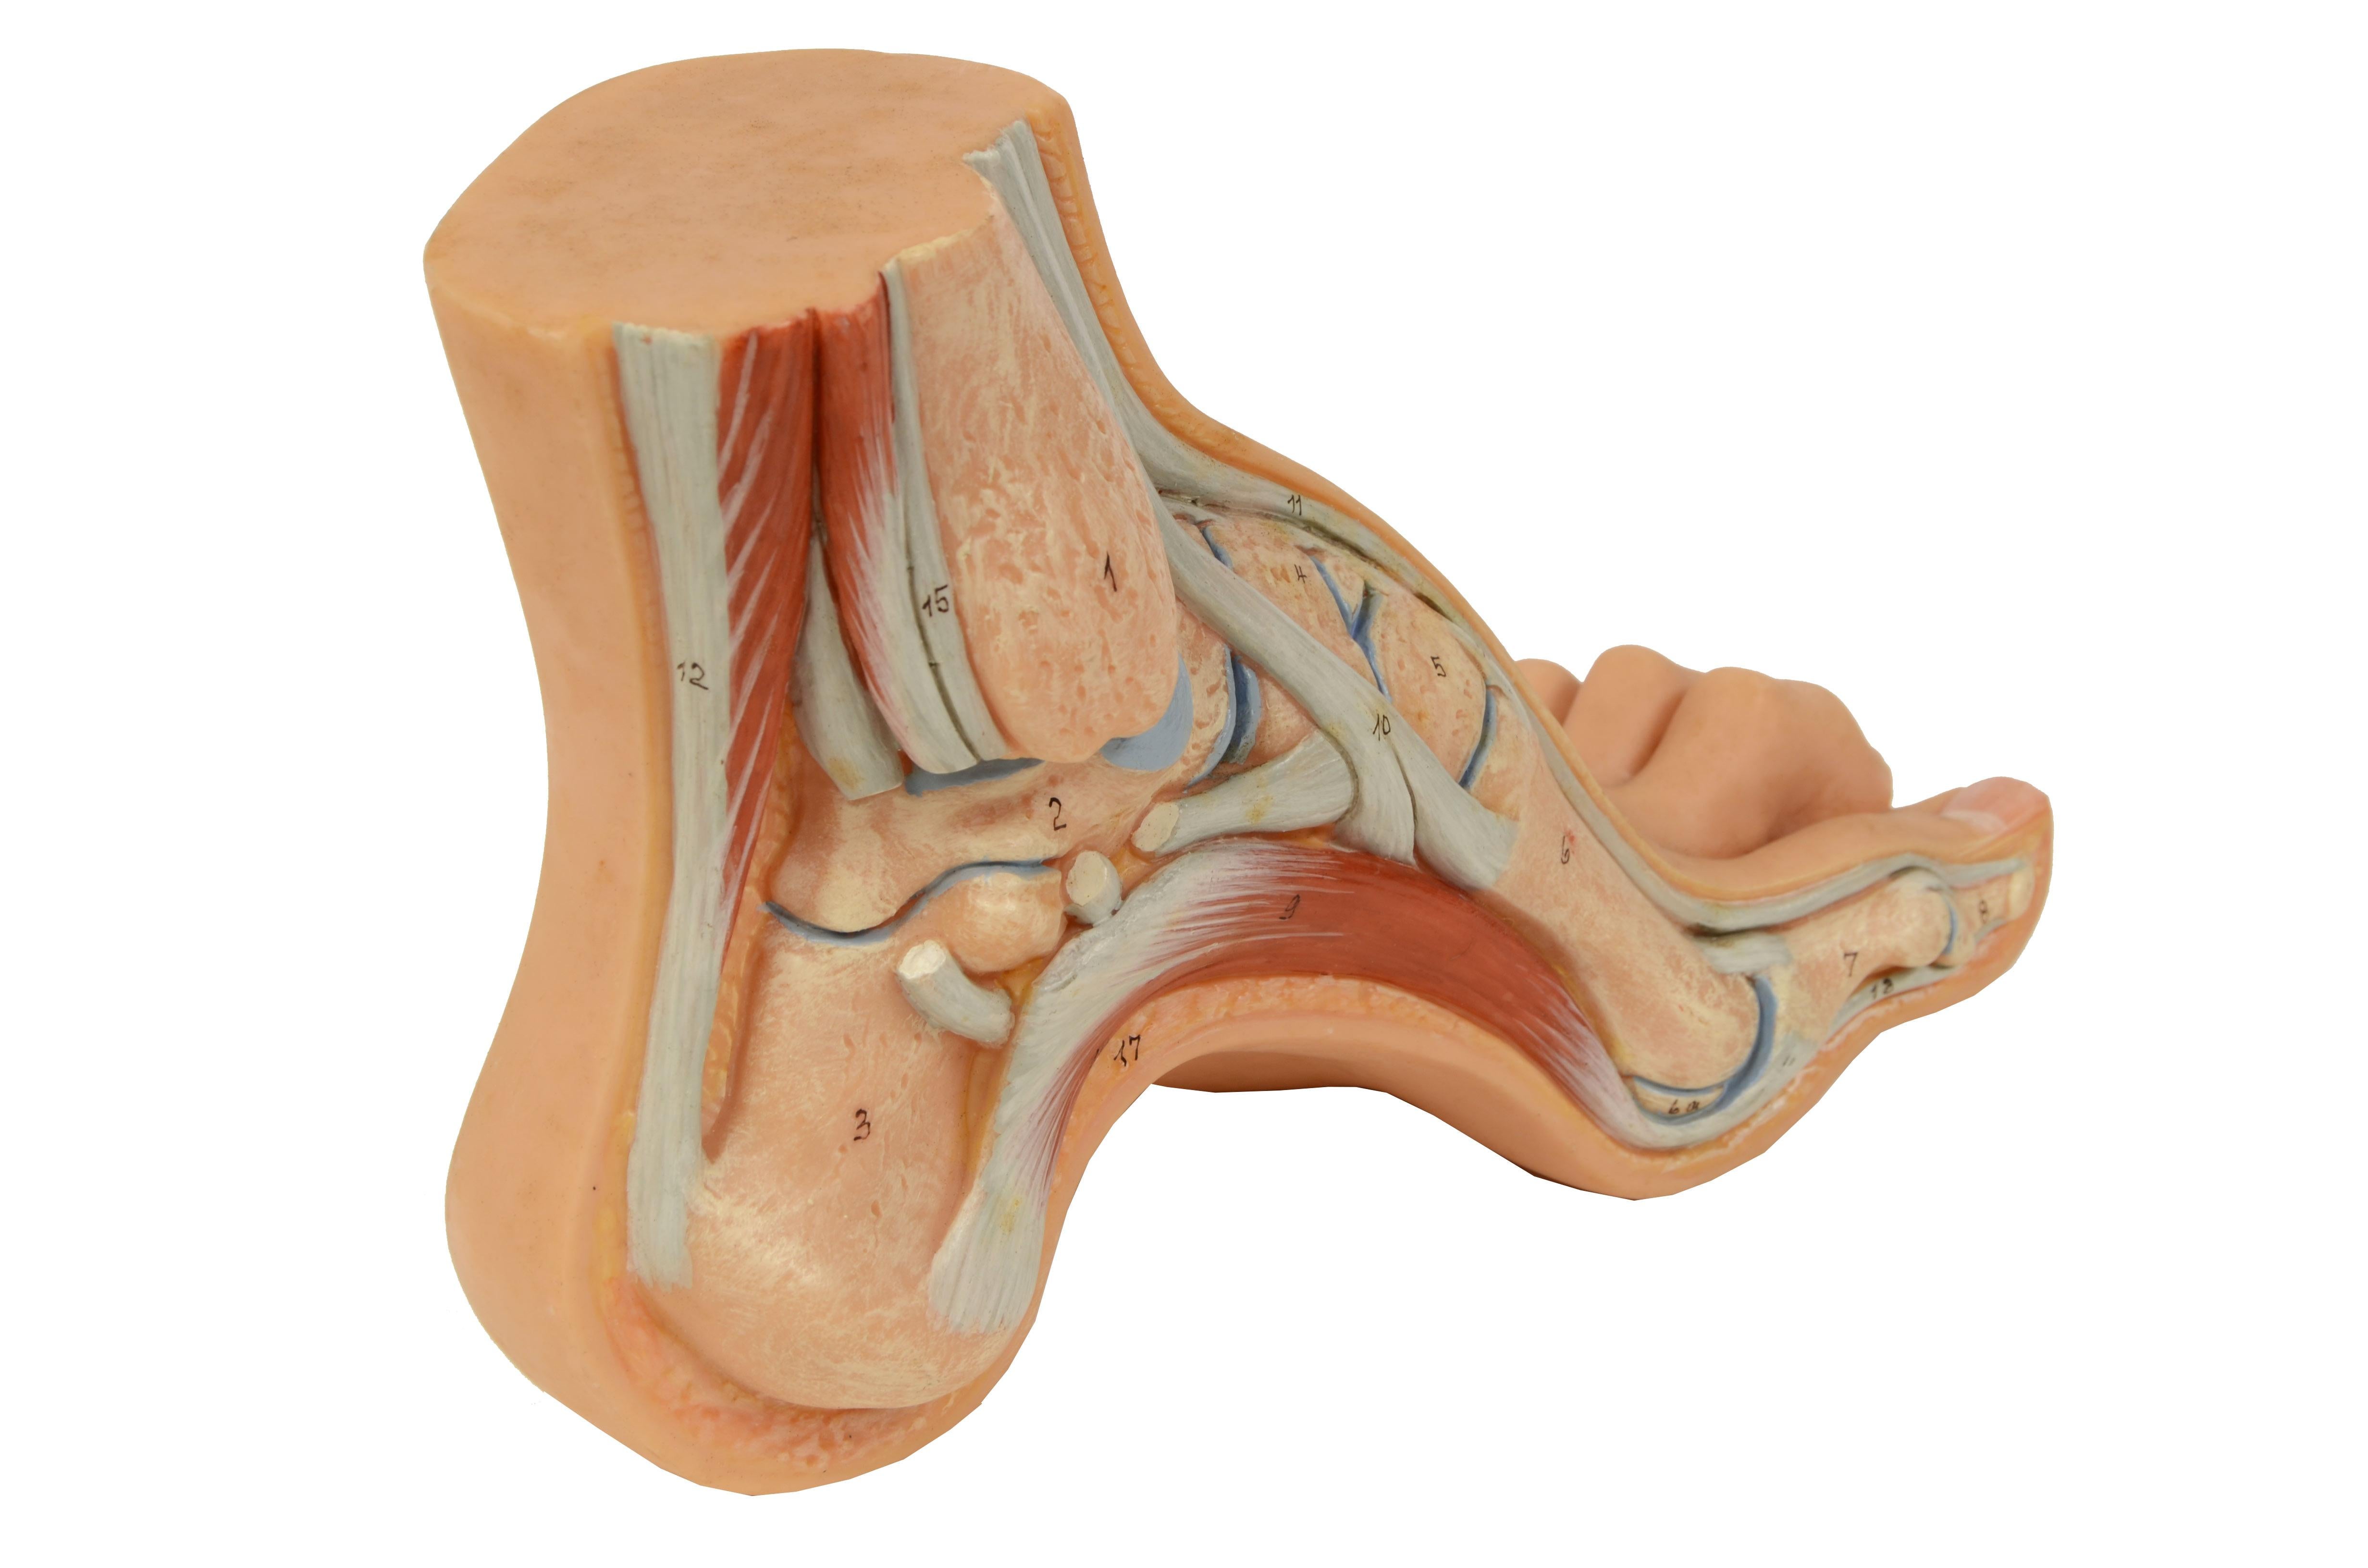 Anatomical teaching model of normal size depicting a hollow foot in section showing a strong accentuation of the plantar arch and how the foot rest is mainly on the forefoot and heel. 
The sectioned part shows the various parts of the foot, bones,